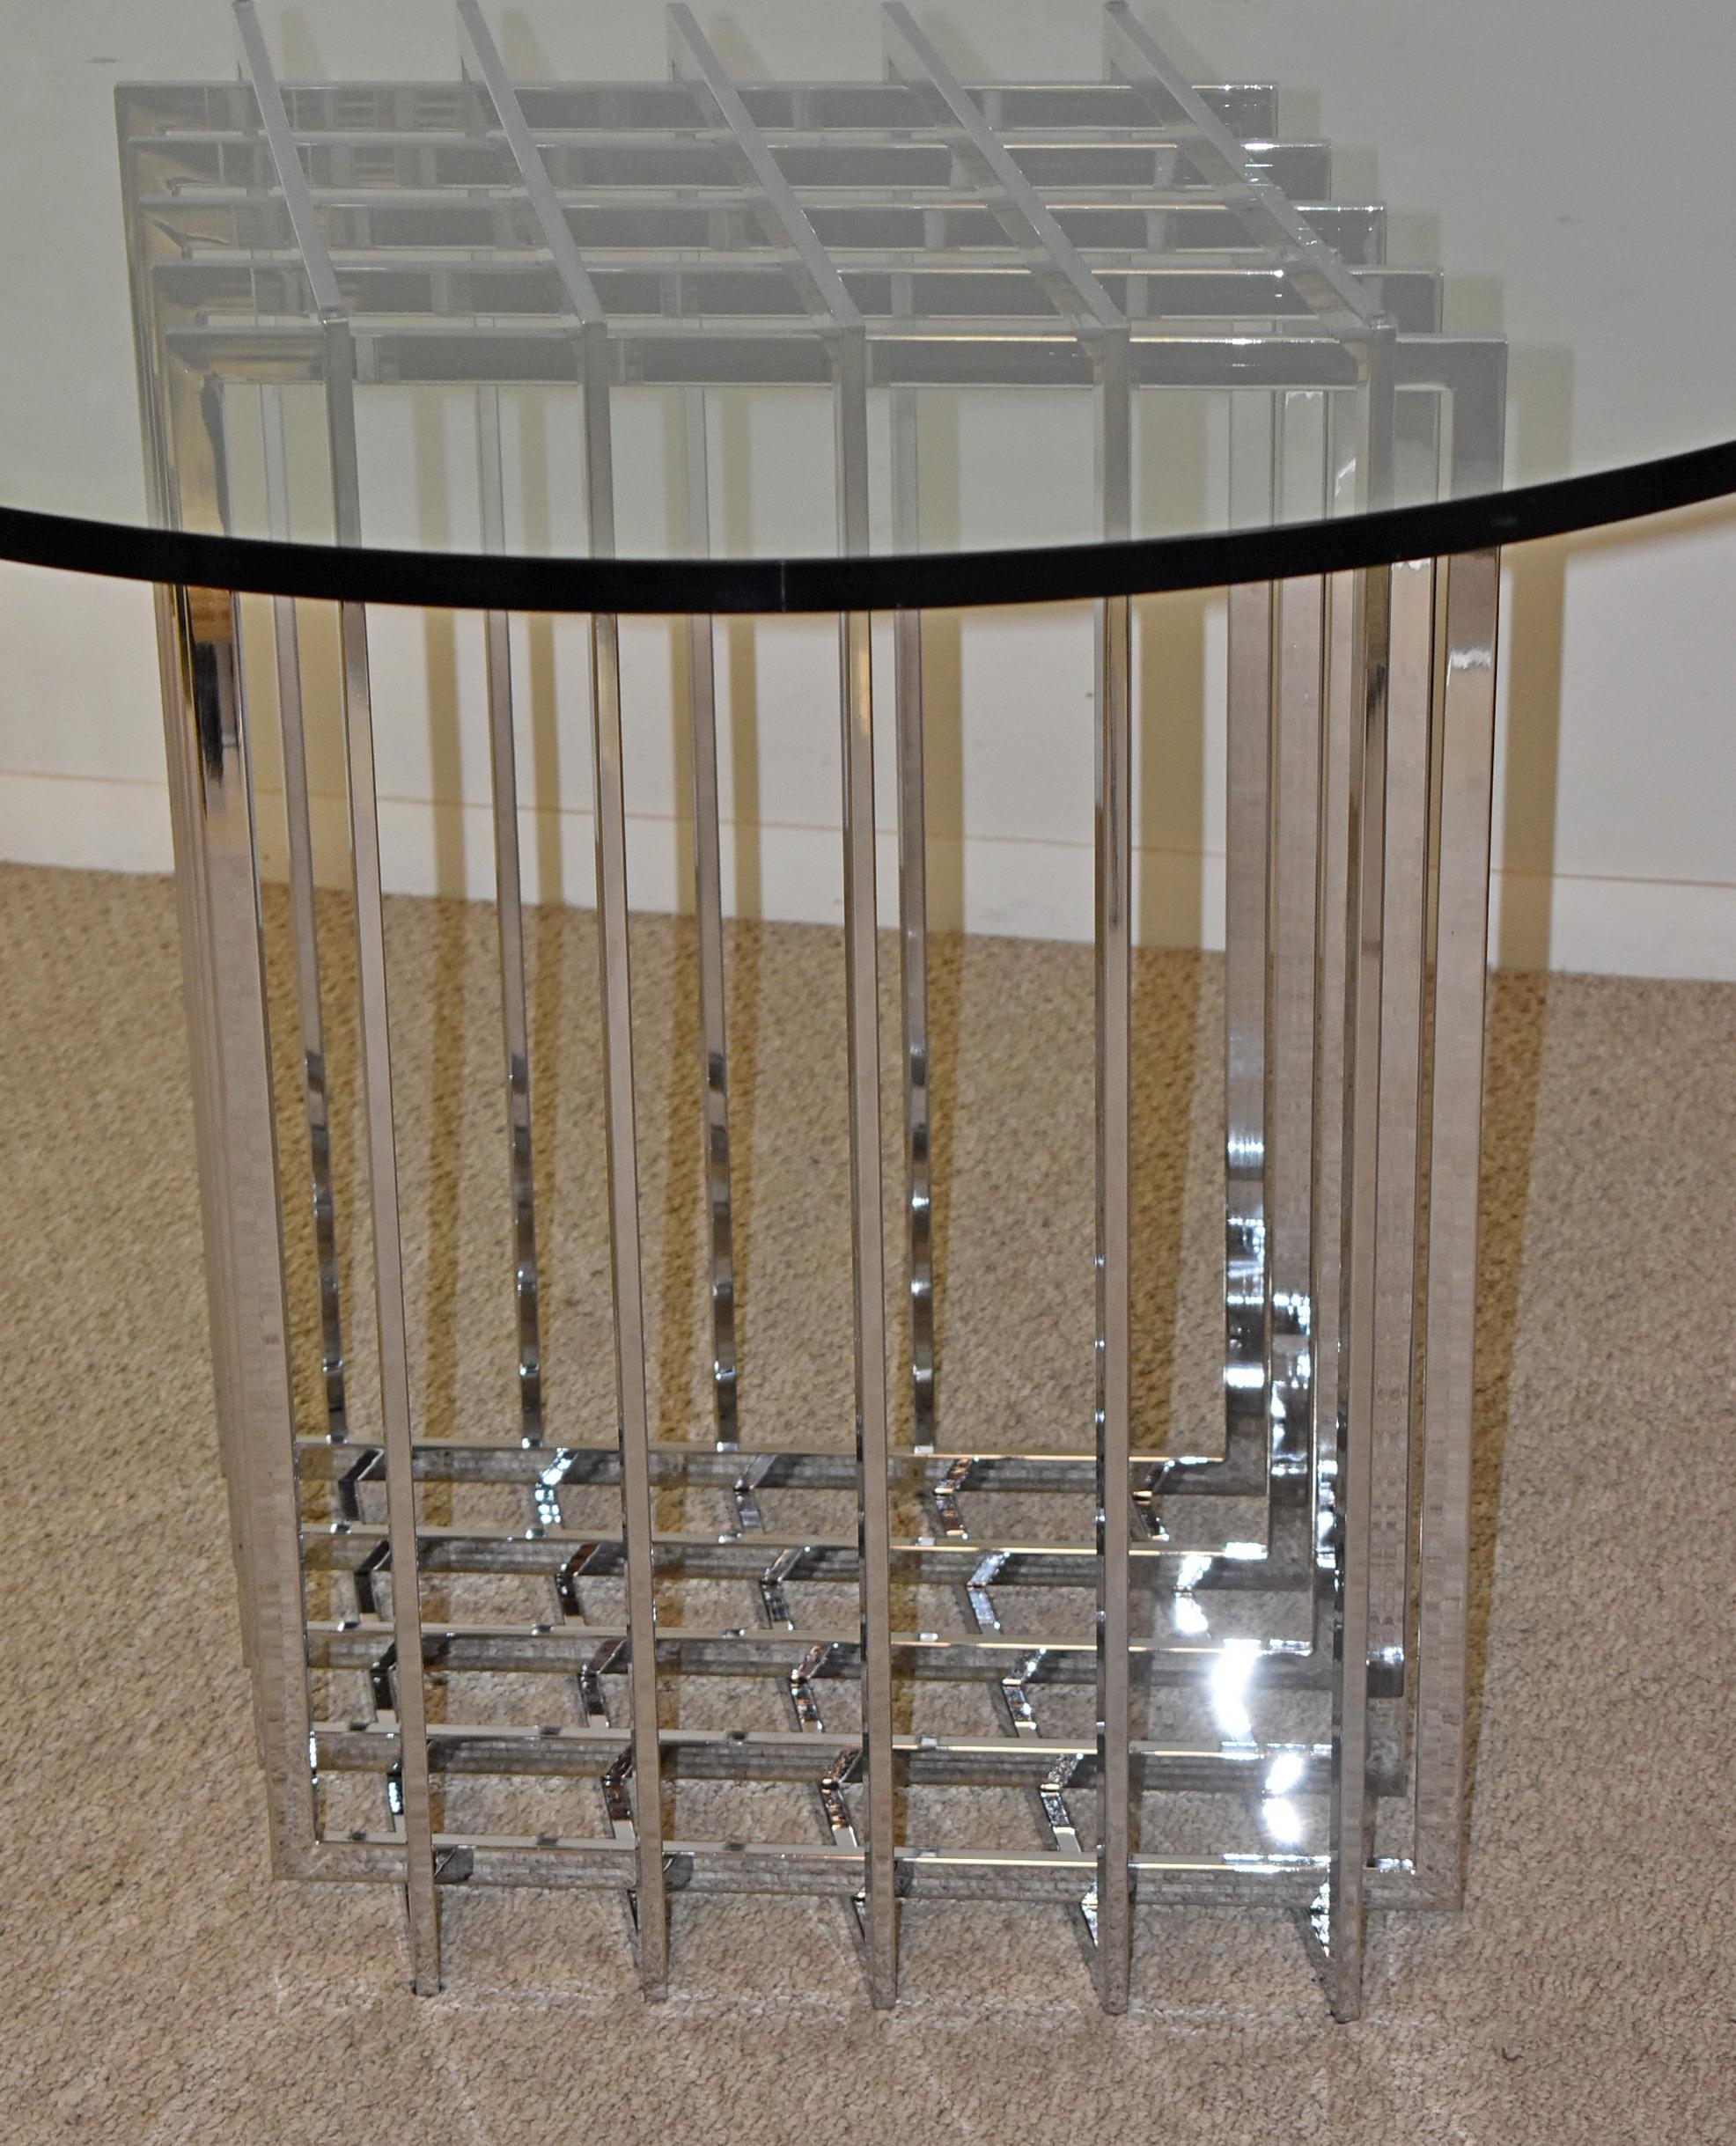 Pierre Cardin Sculptural Chrome Grid Table Base. Circa 1970-1979, Mid-Century Modern Period. Dimensional table base in flat chrome bar form. Adjustable shapes. Great Vintage condition, cleaned and polished due to wear consistent with usage and age.